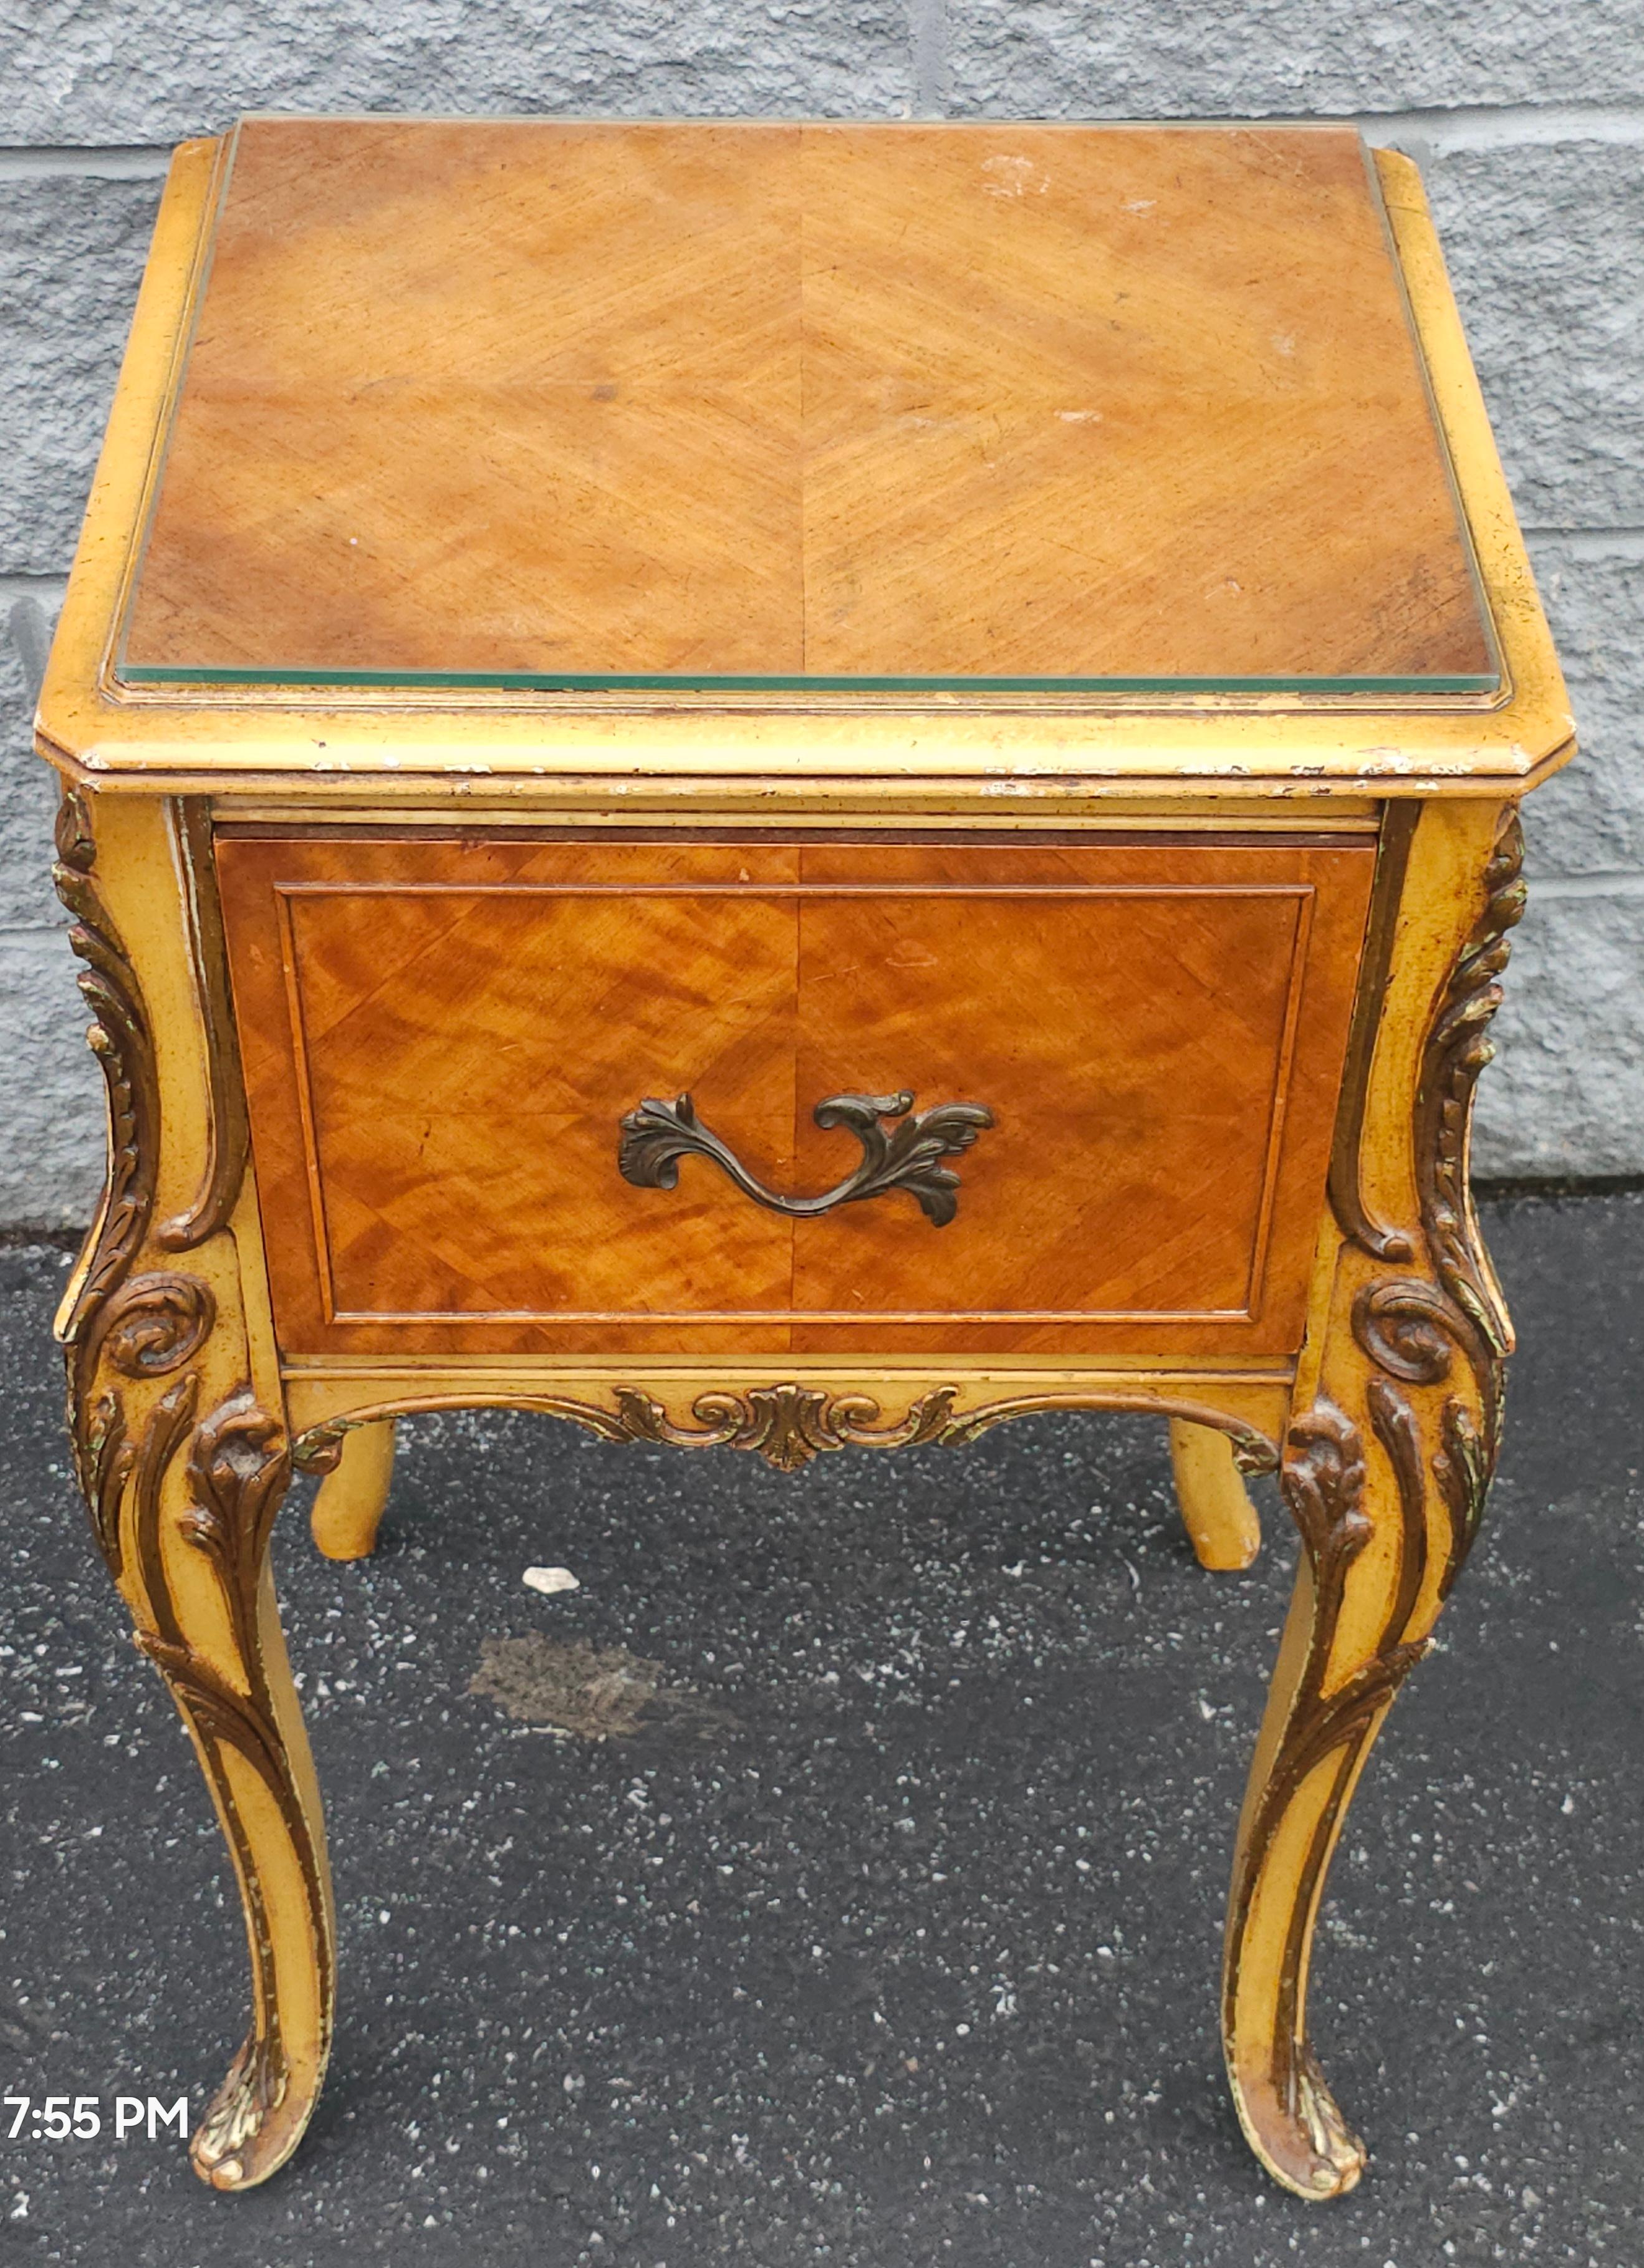 A Late 19th Century Louis XVI Style Provincial Walnut Bedside Cabinet with protective Glass Top. Measures 18